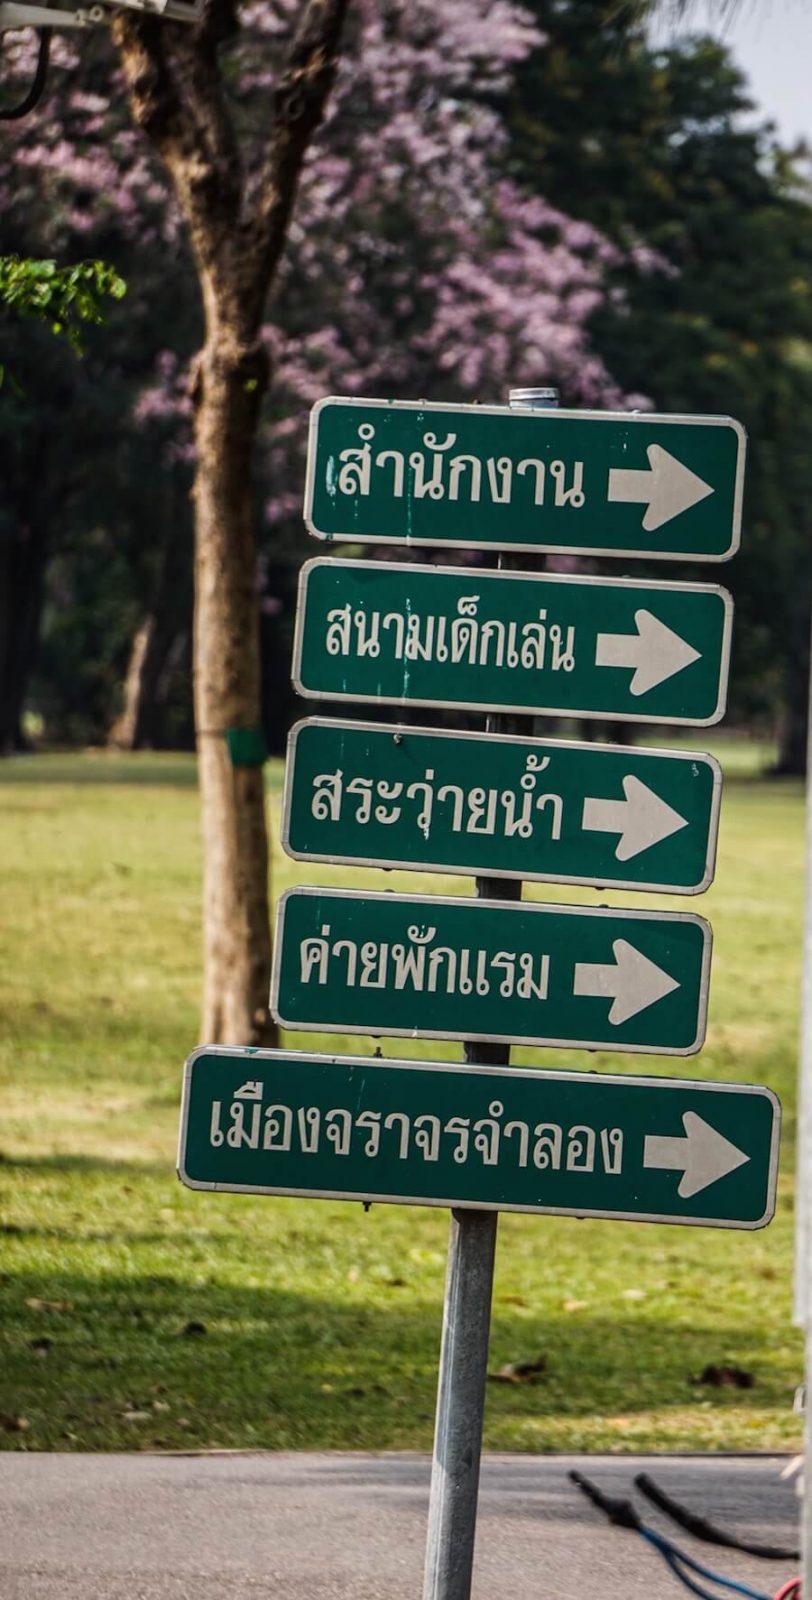 plan my journey: sign post with 5 green signs all pointing in the same direction written in Thai